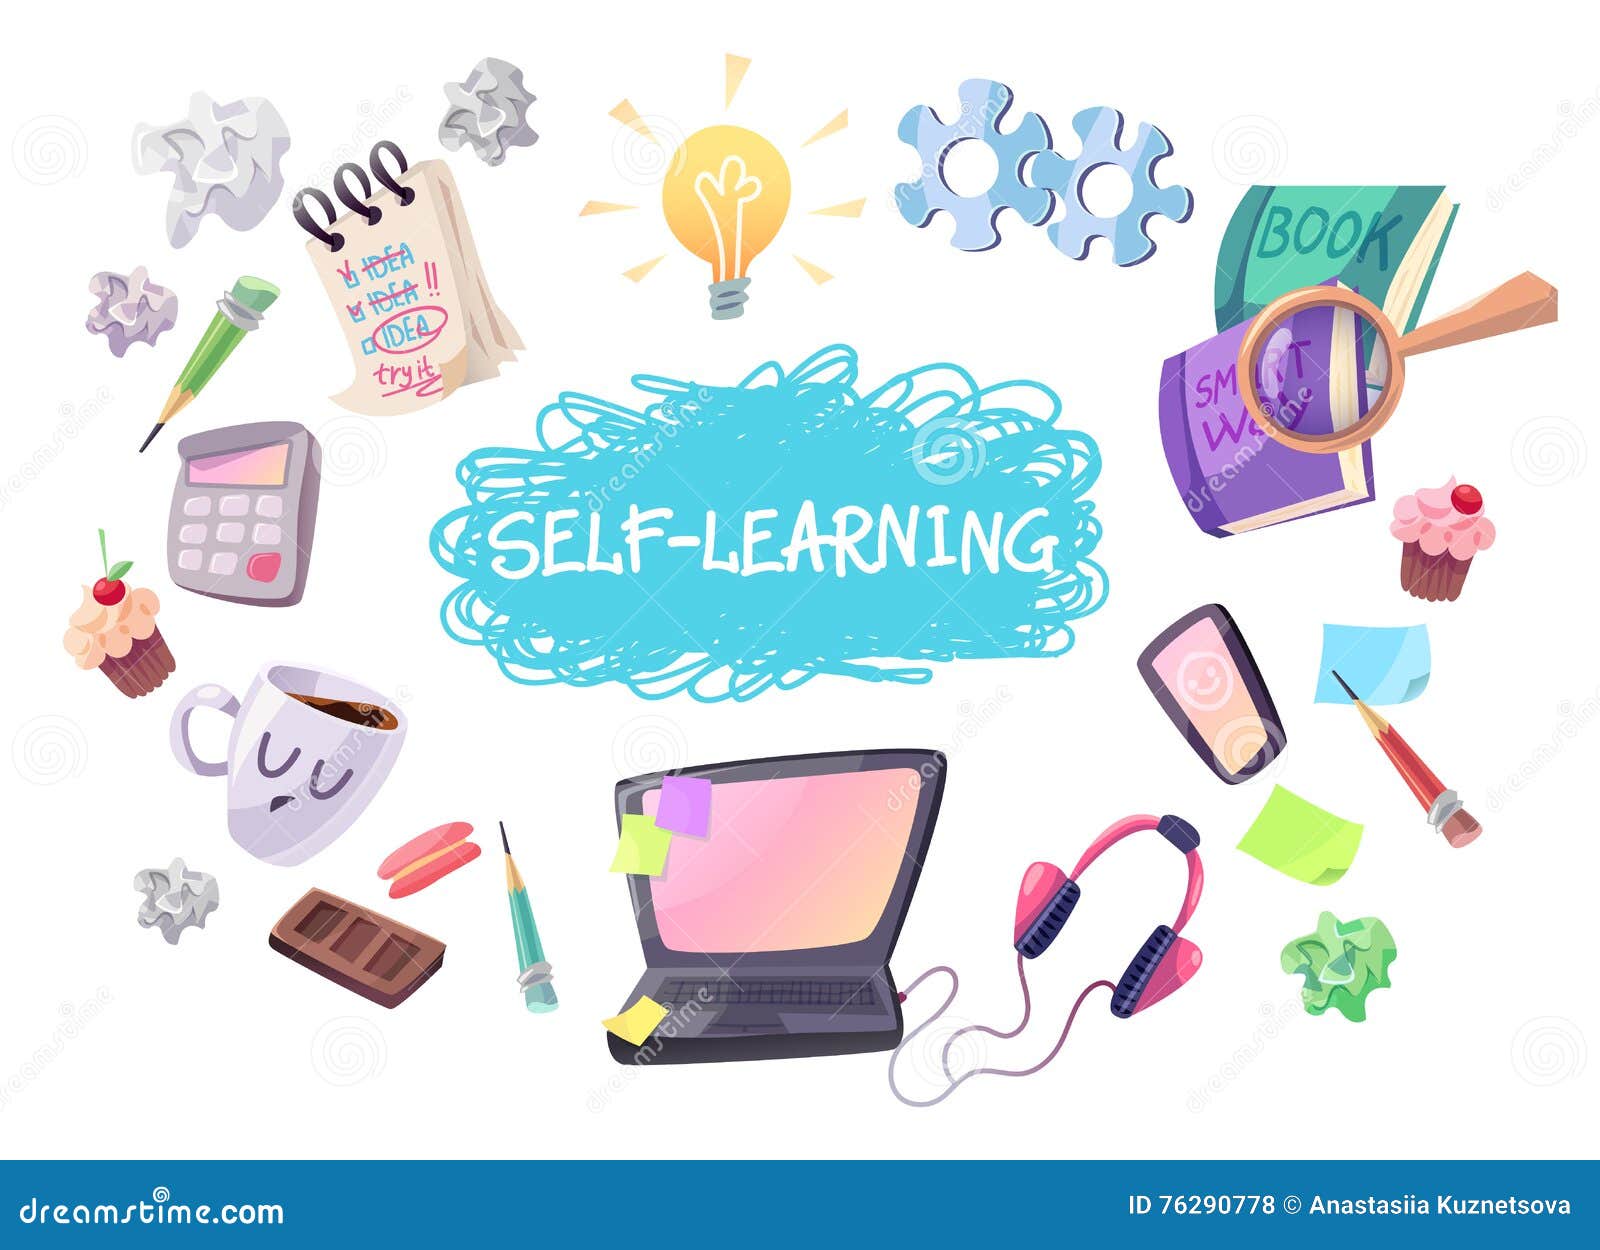 self learning concept illustration laptop phone headphones coffee notebok magnifier books bulb gears etc isolated cartoon objects 76290778